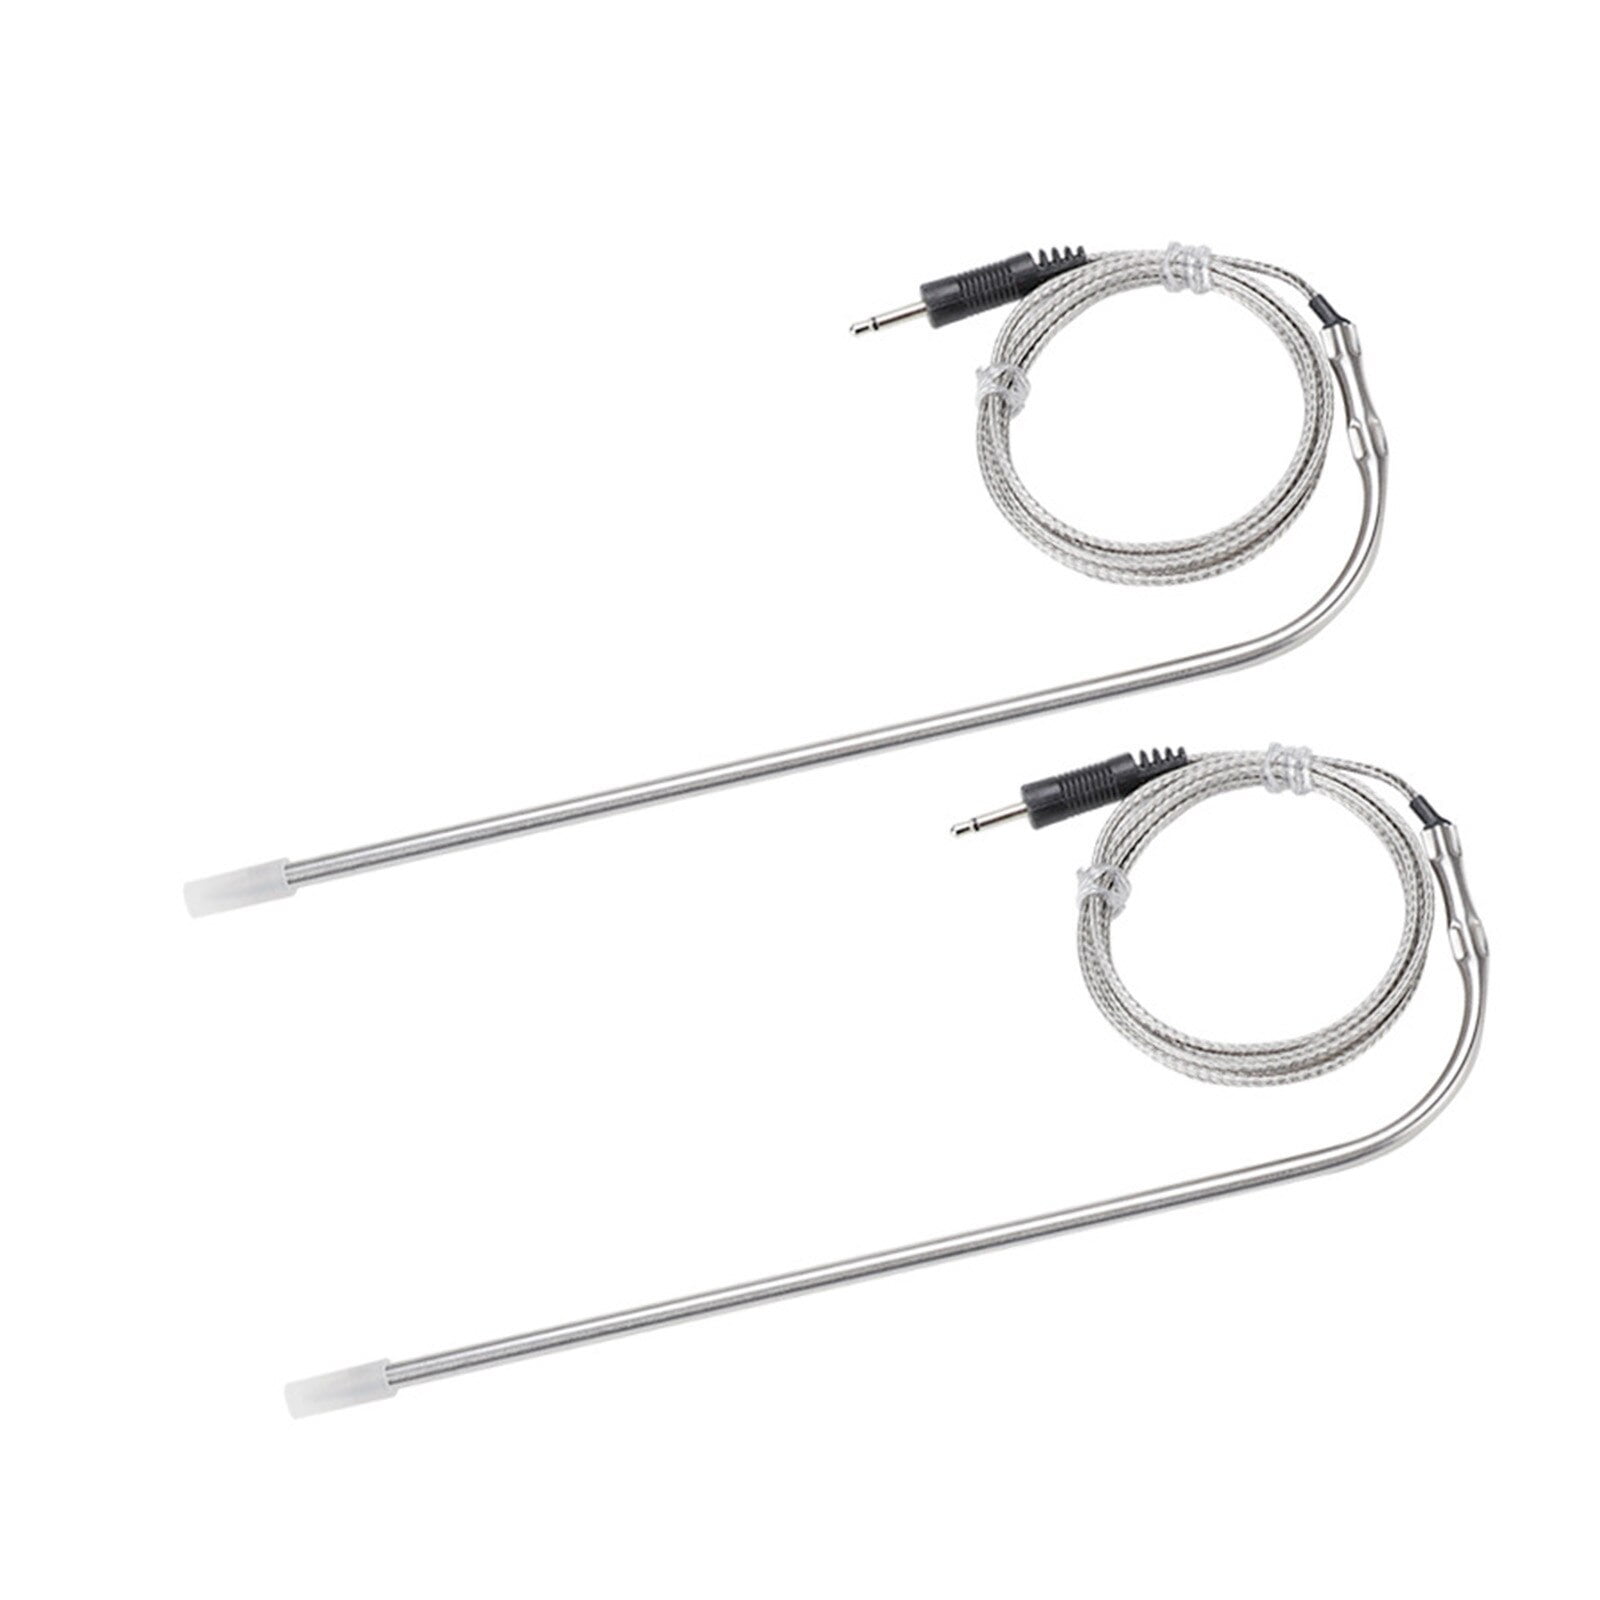 Maxred 9755542 Meat Probe Thermometer Thermistor Replacement for Kitch –